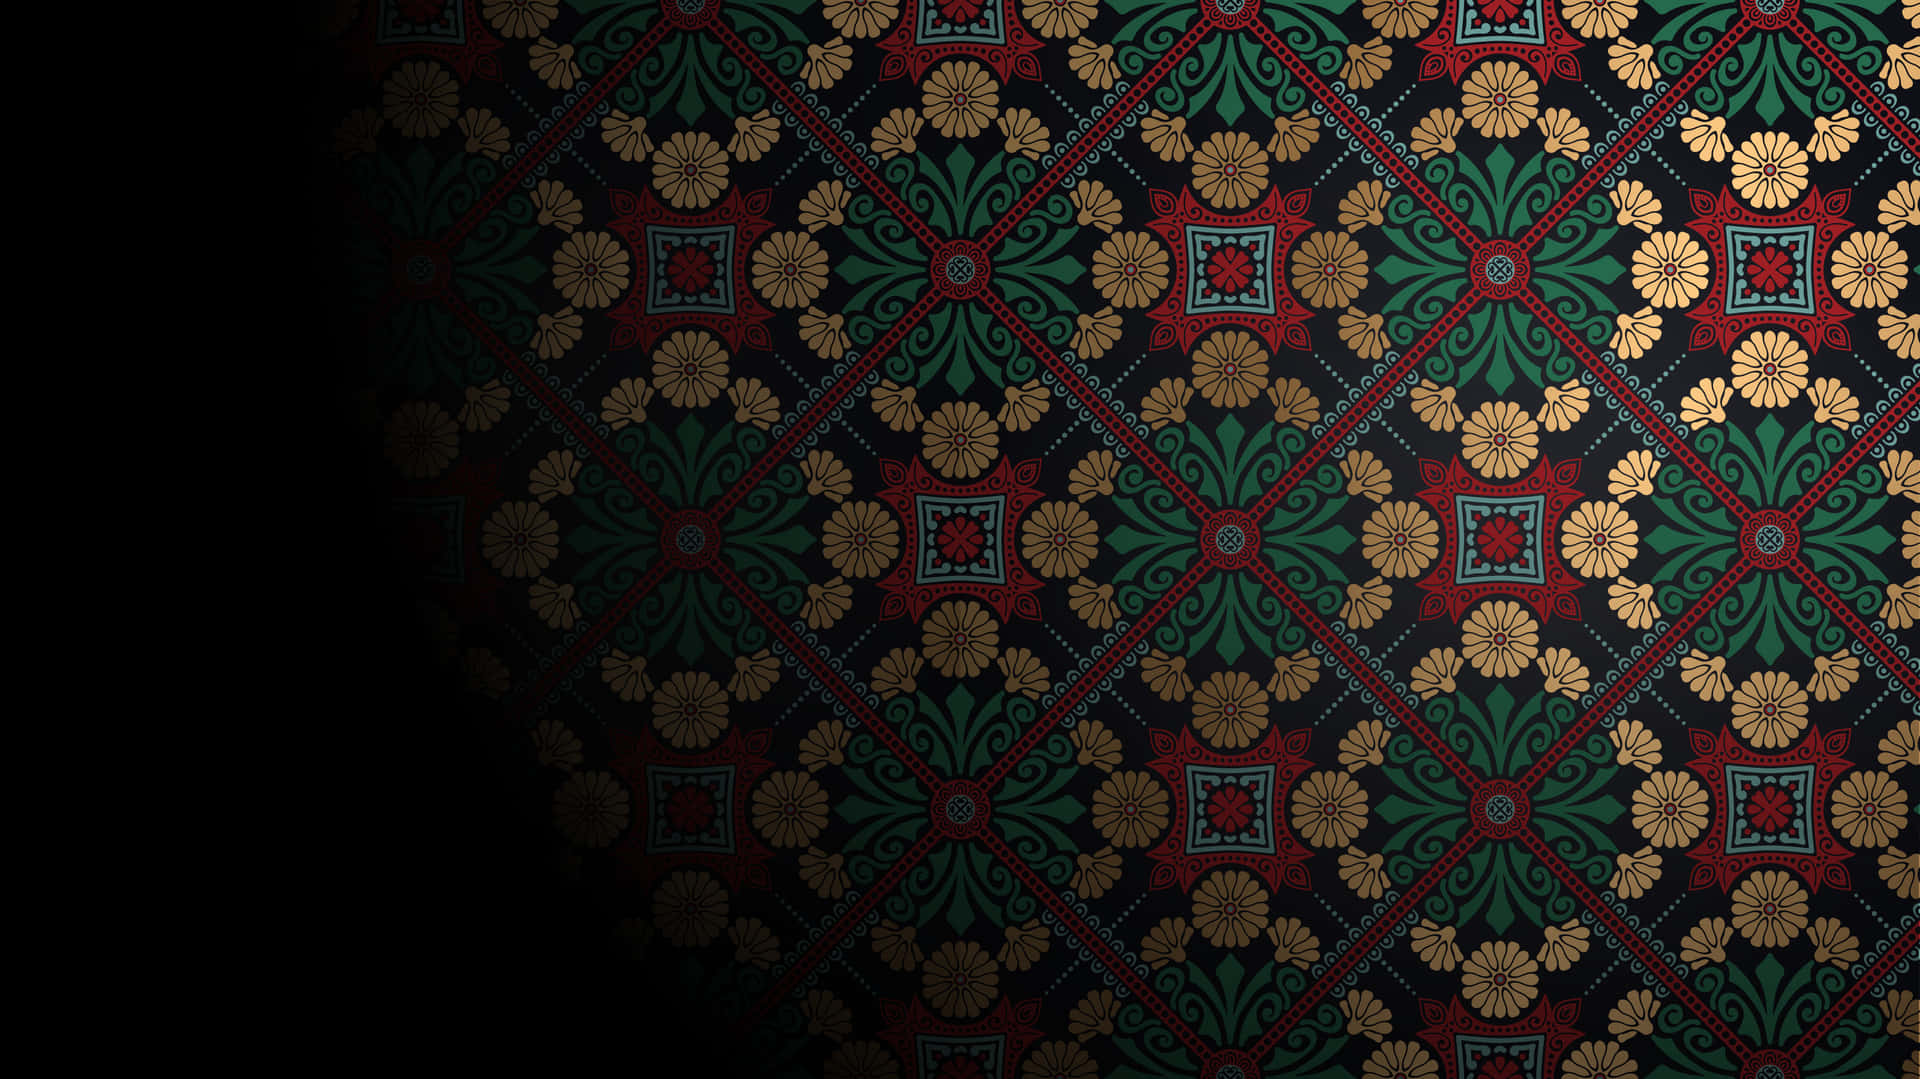 Wallpaper With A Black Background And Red And Green Designs Wallpaper